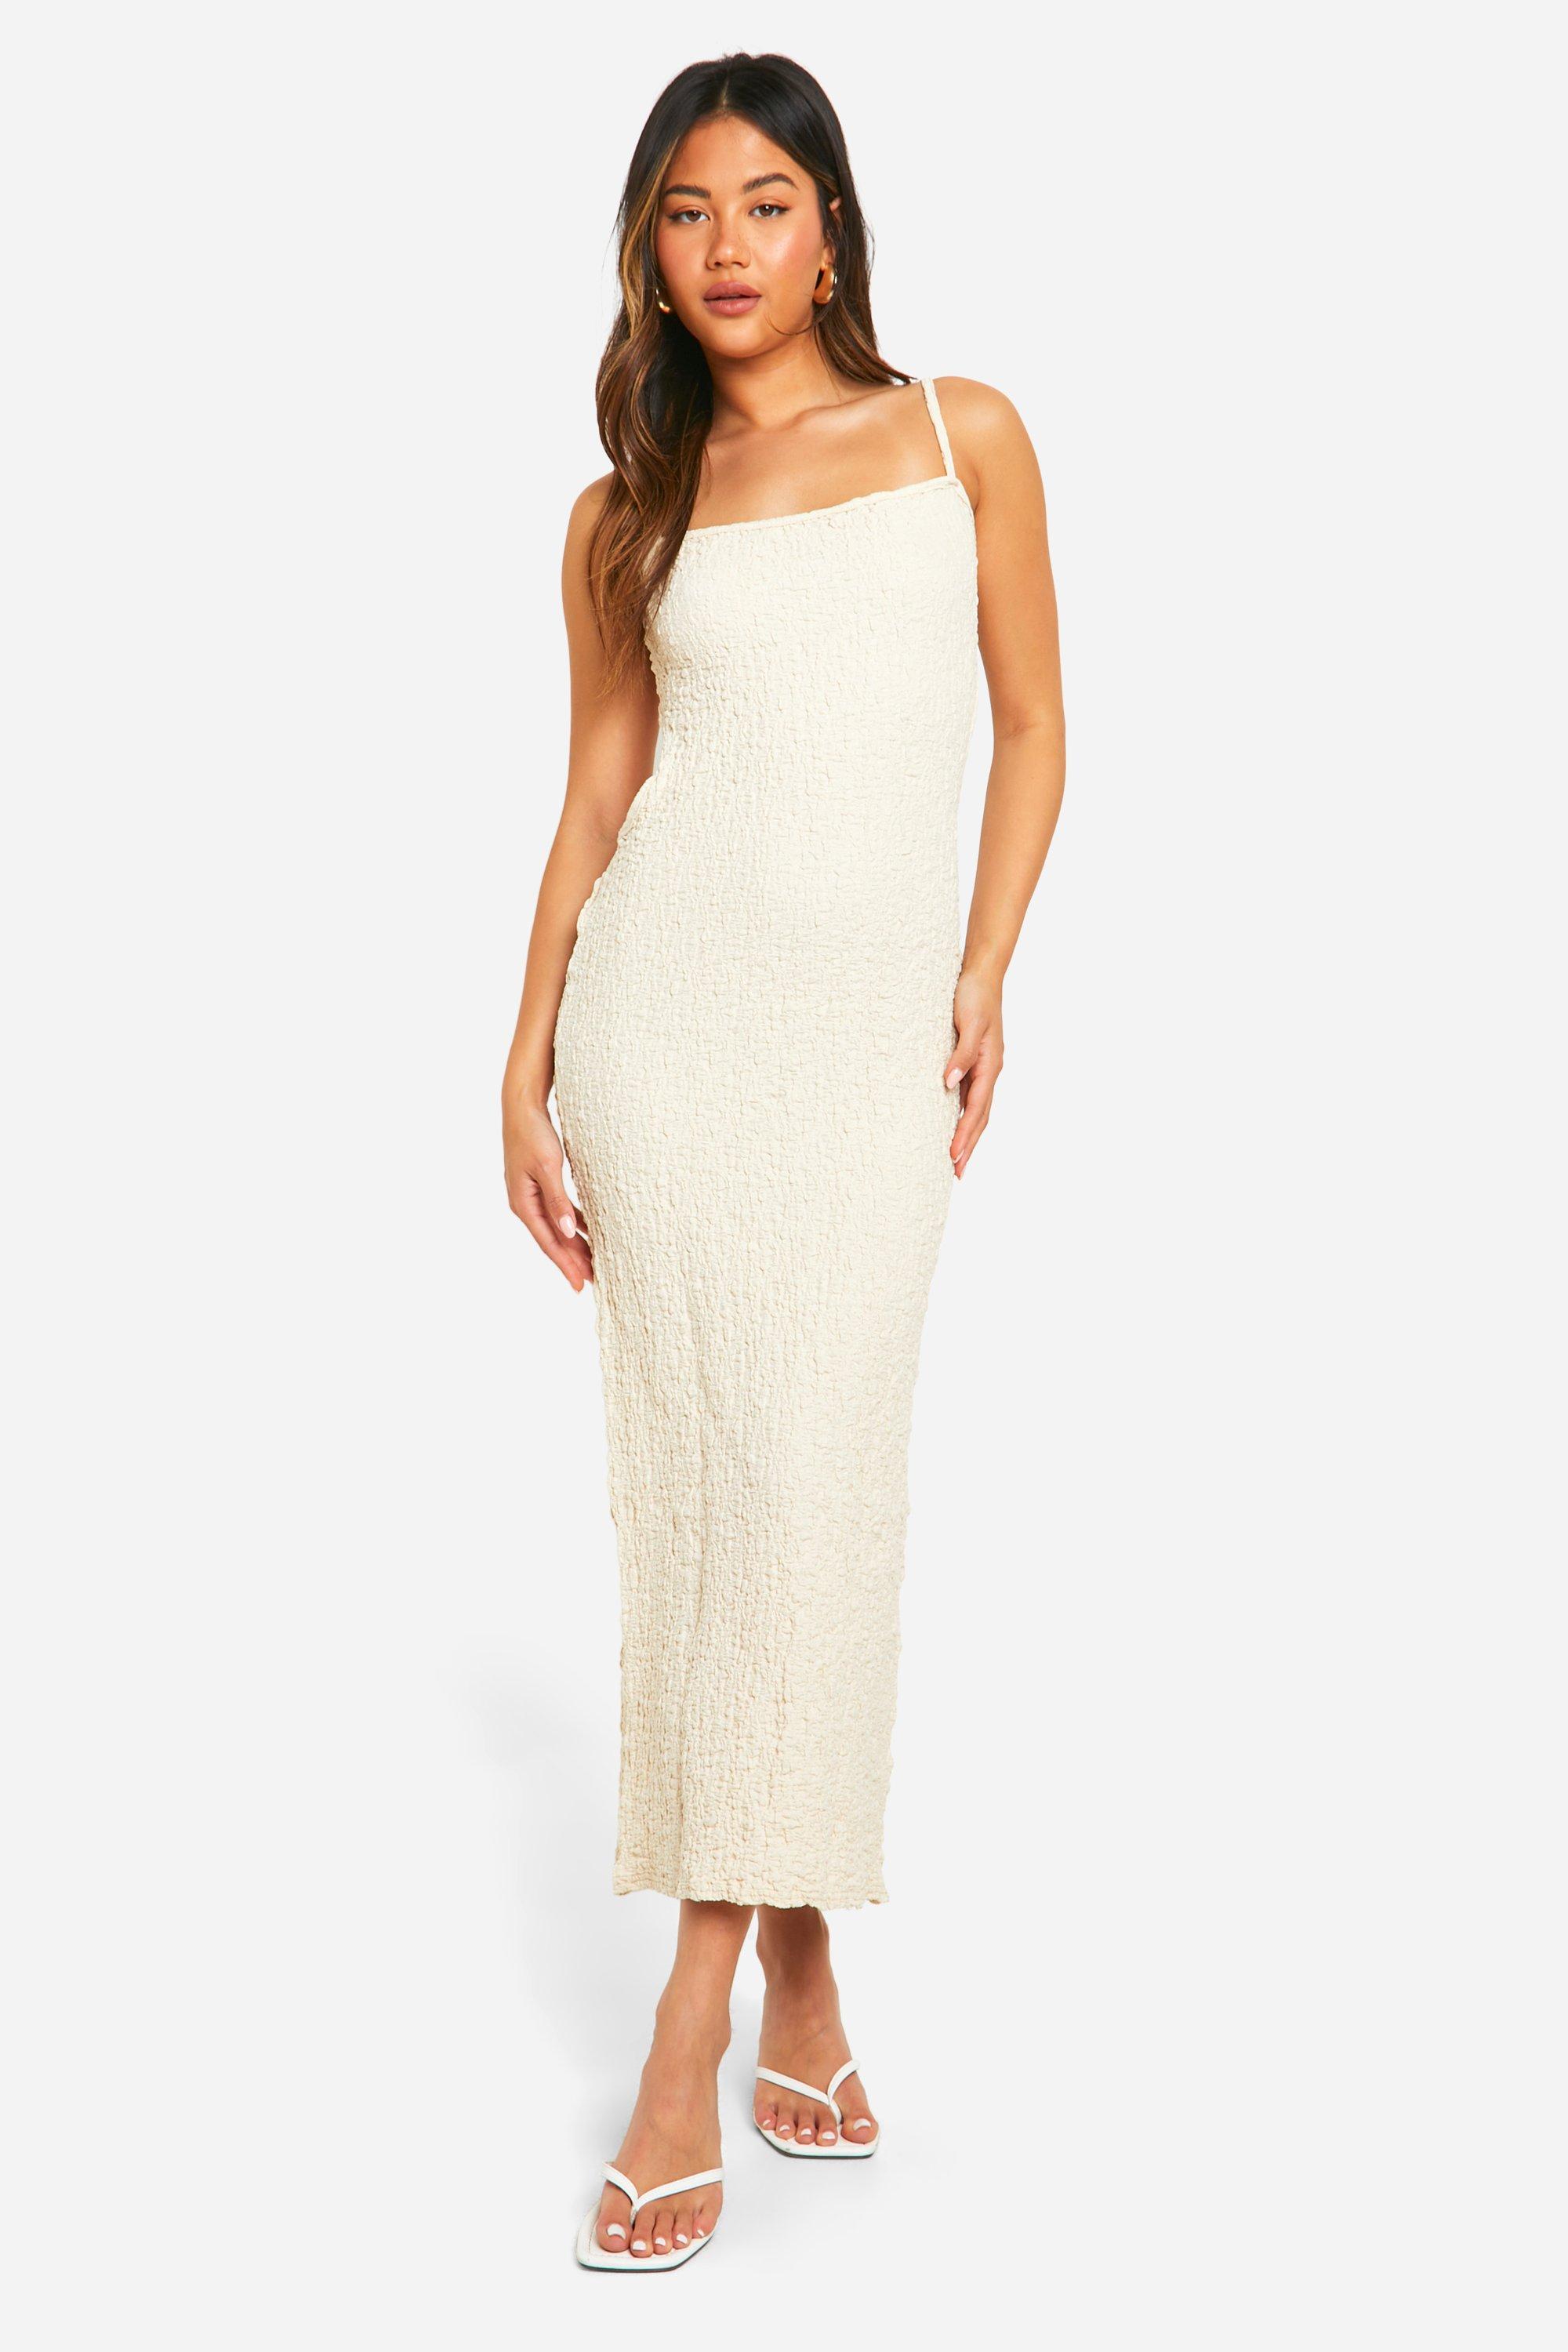 Boohoo Textured Cut Out Side Maxi Dress, White